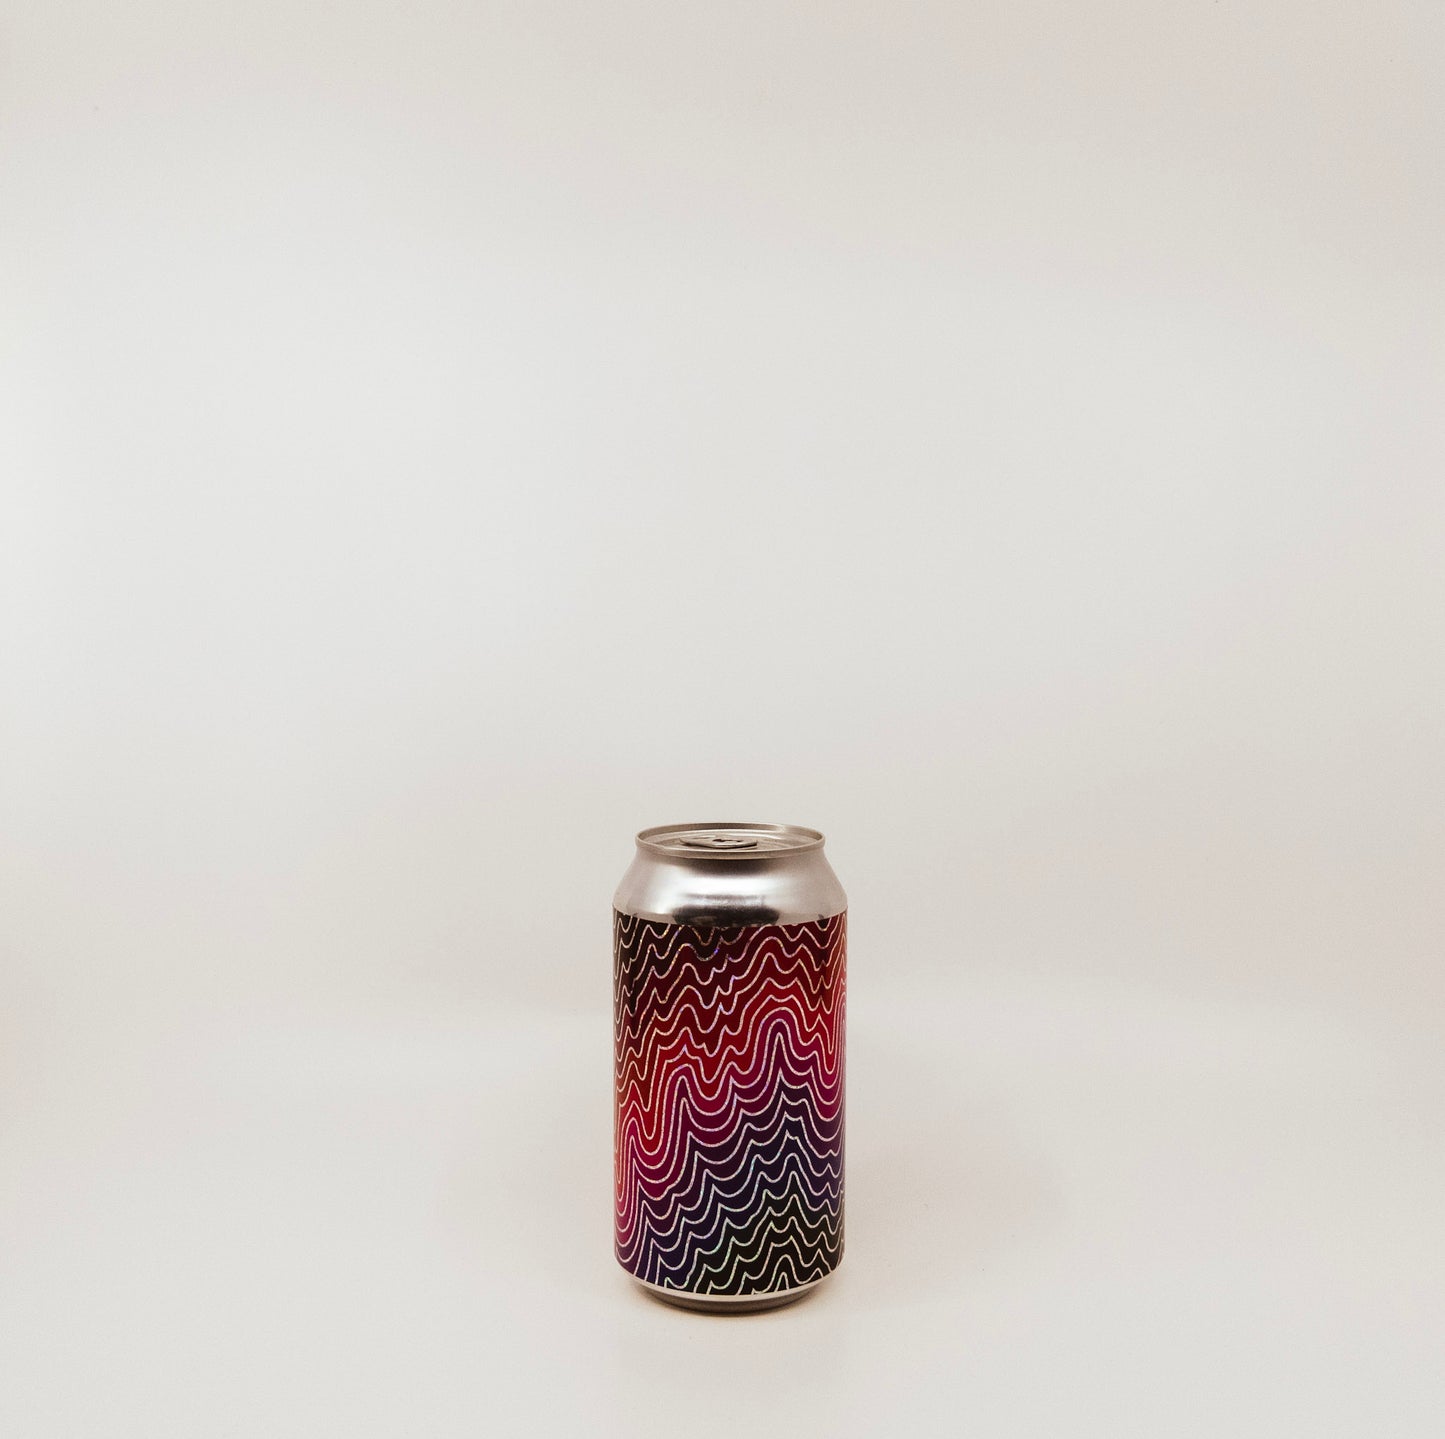 metal can with waves on label